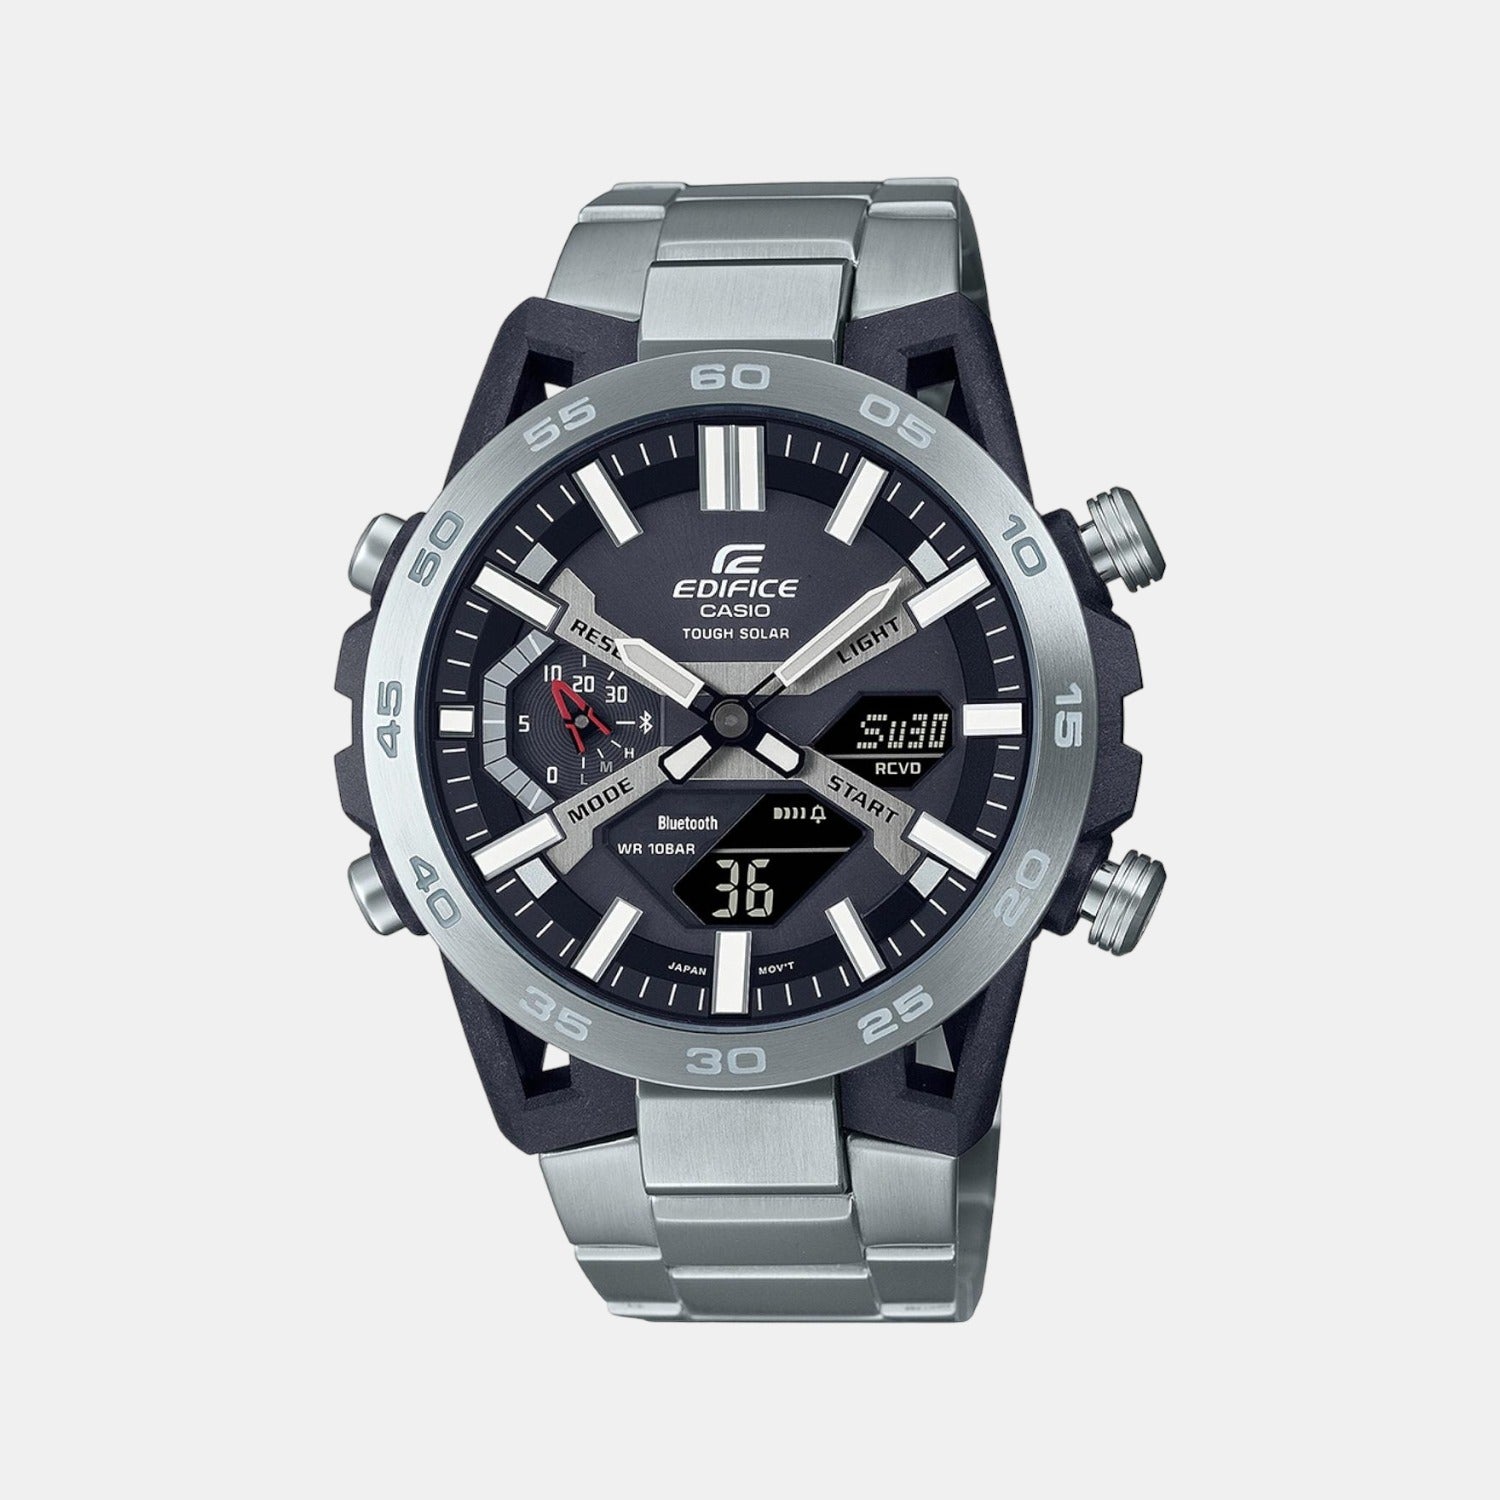 Edifice Male Analog-Digital Stainless Steel Watch Ed564 – Just In Time